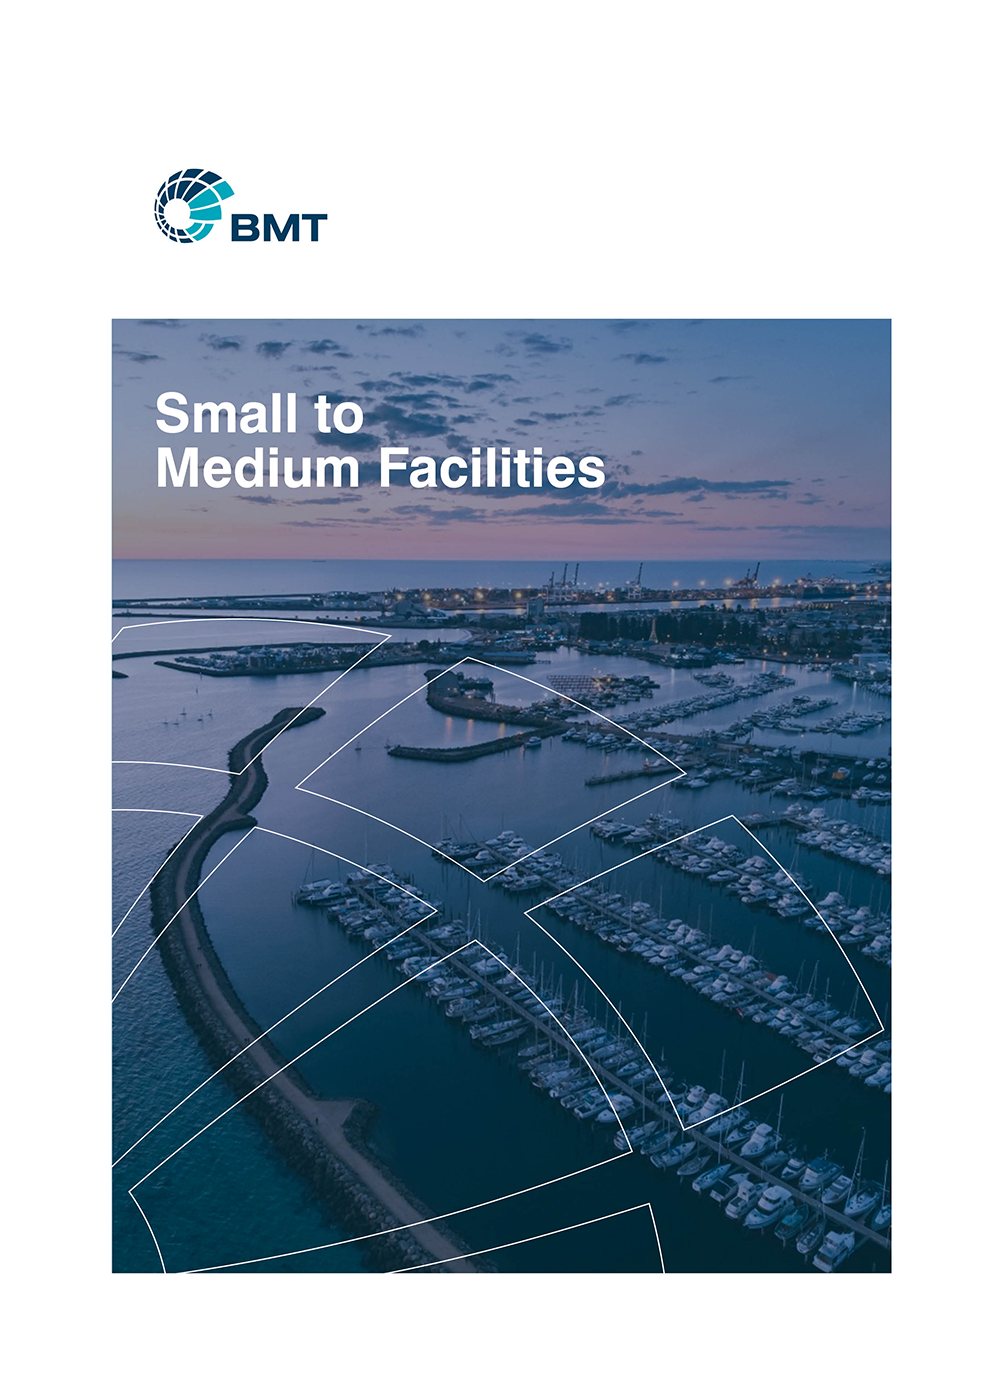 BMT's services for small to medium facilities